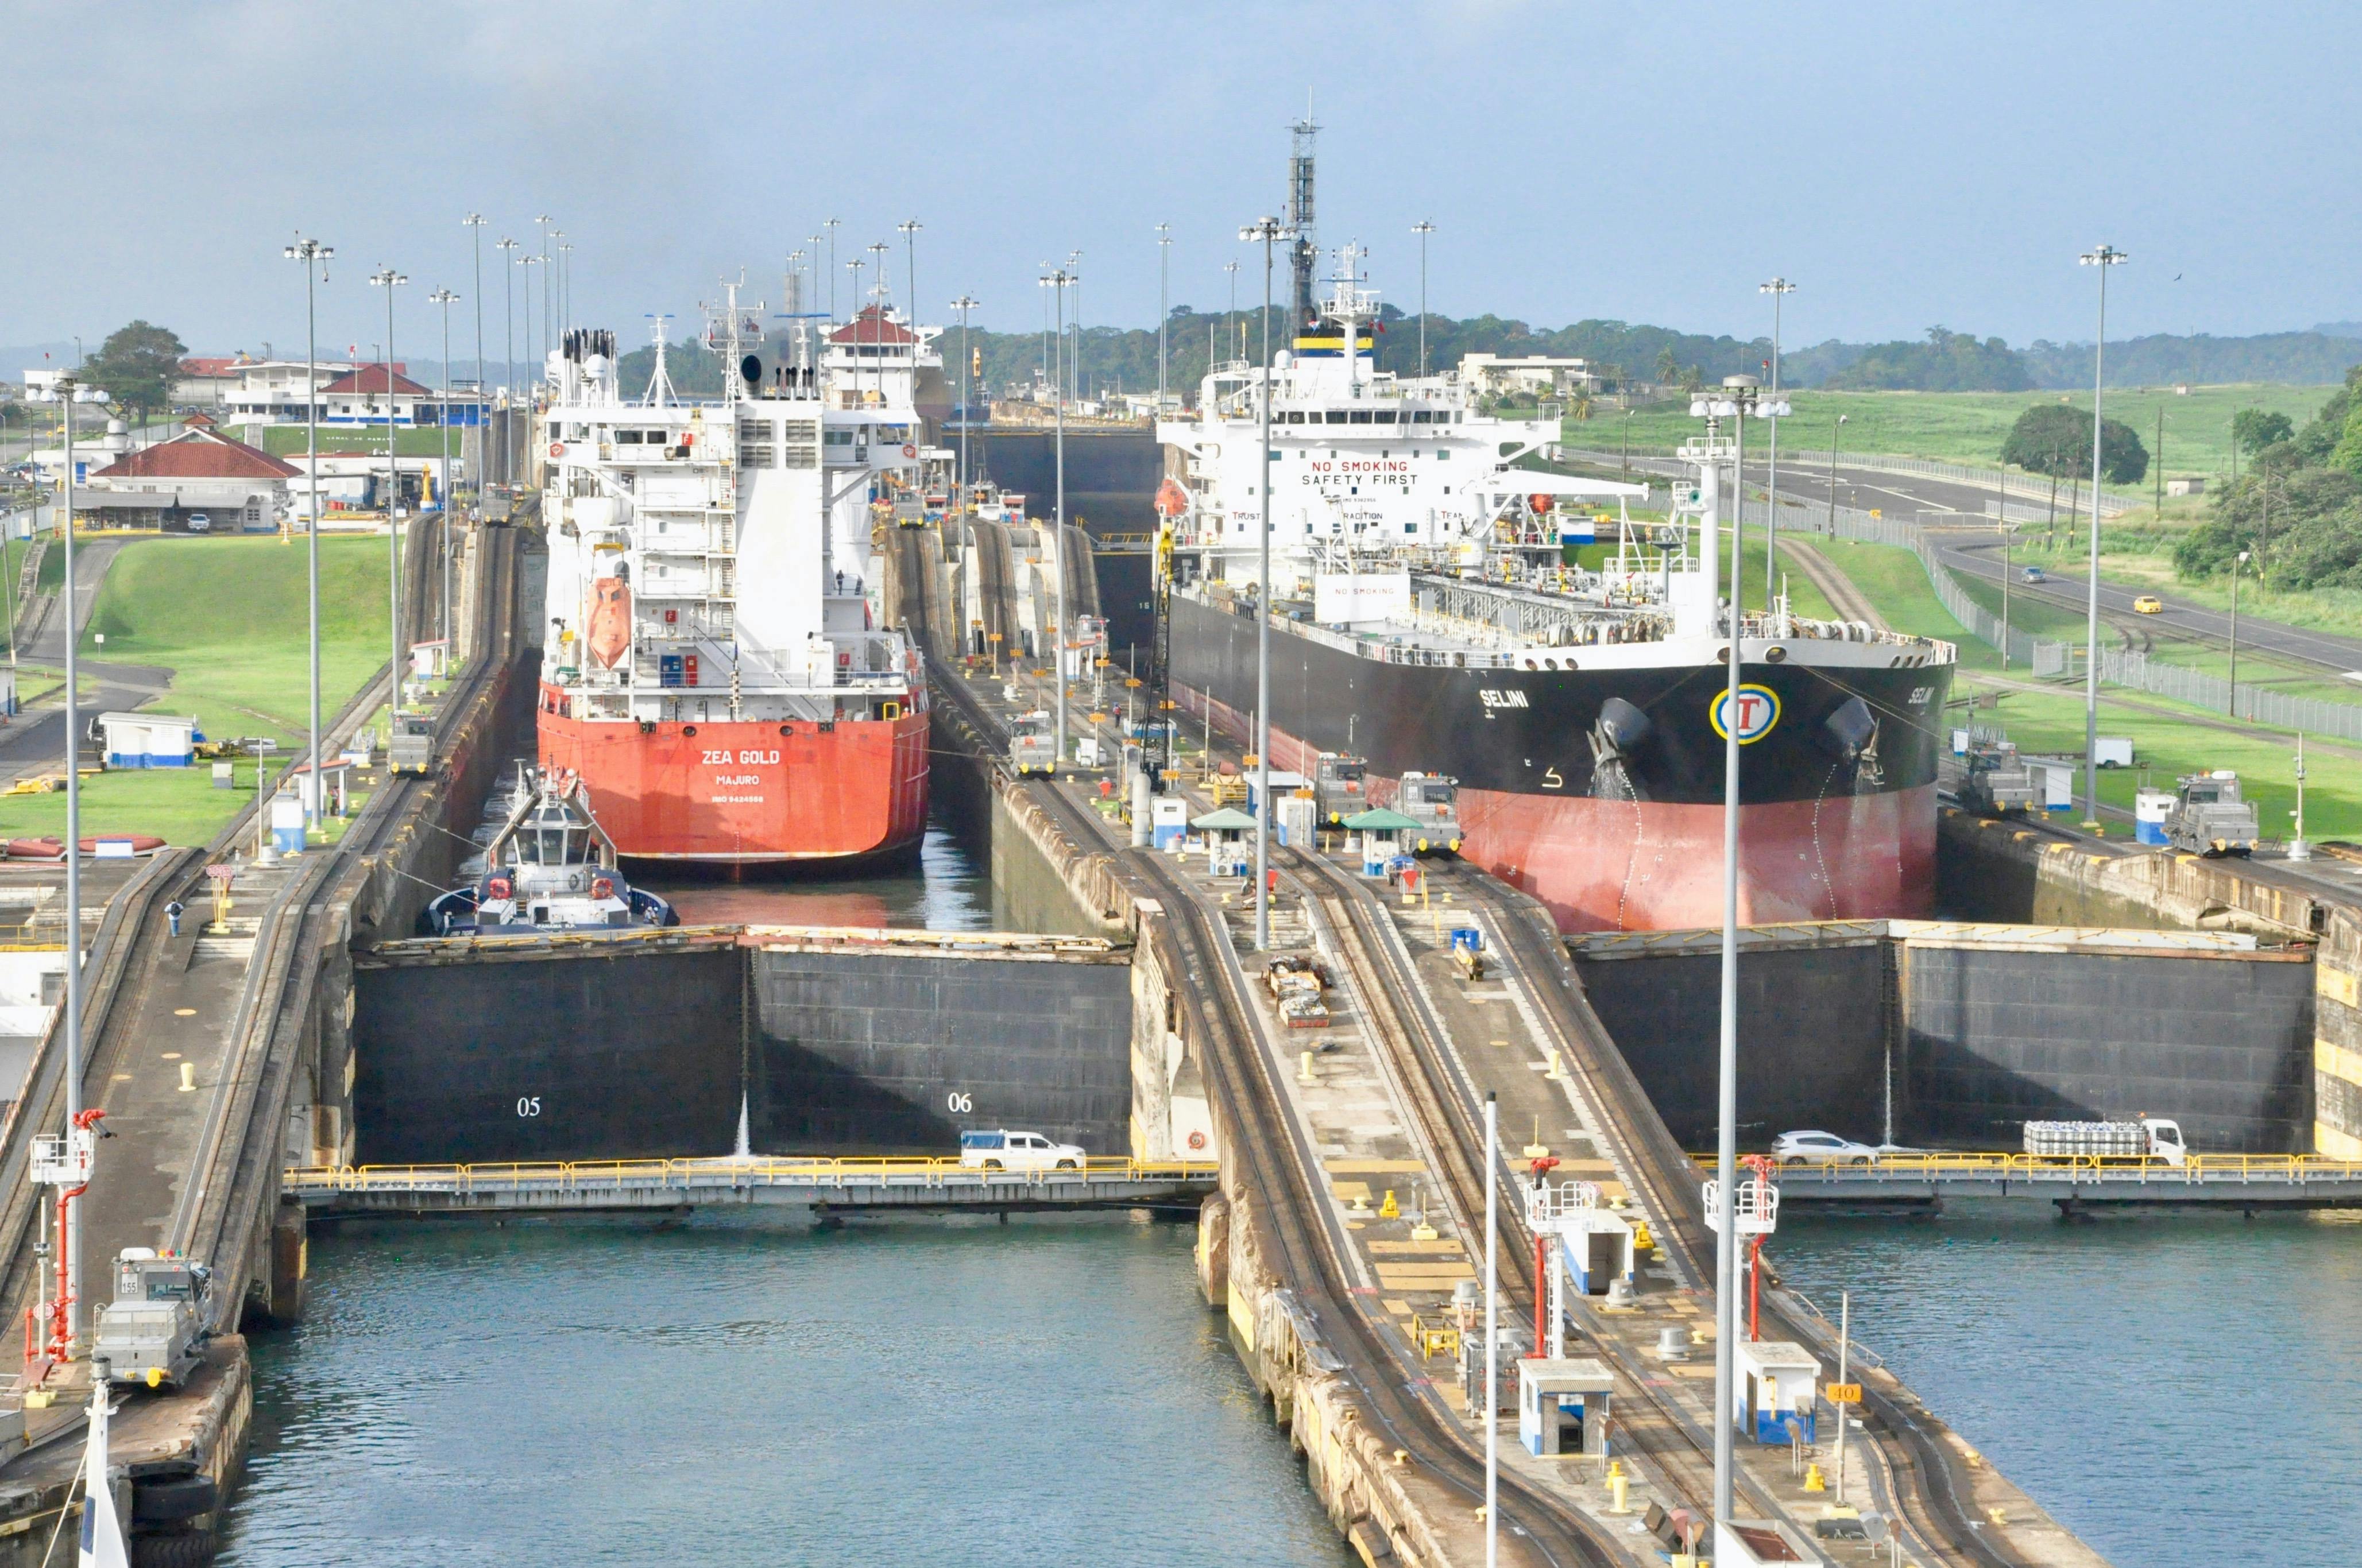 Two ships in locks at the Panama Canal